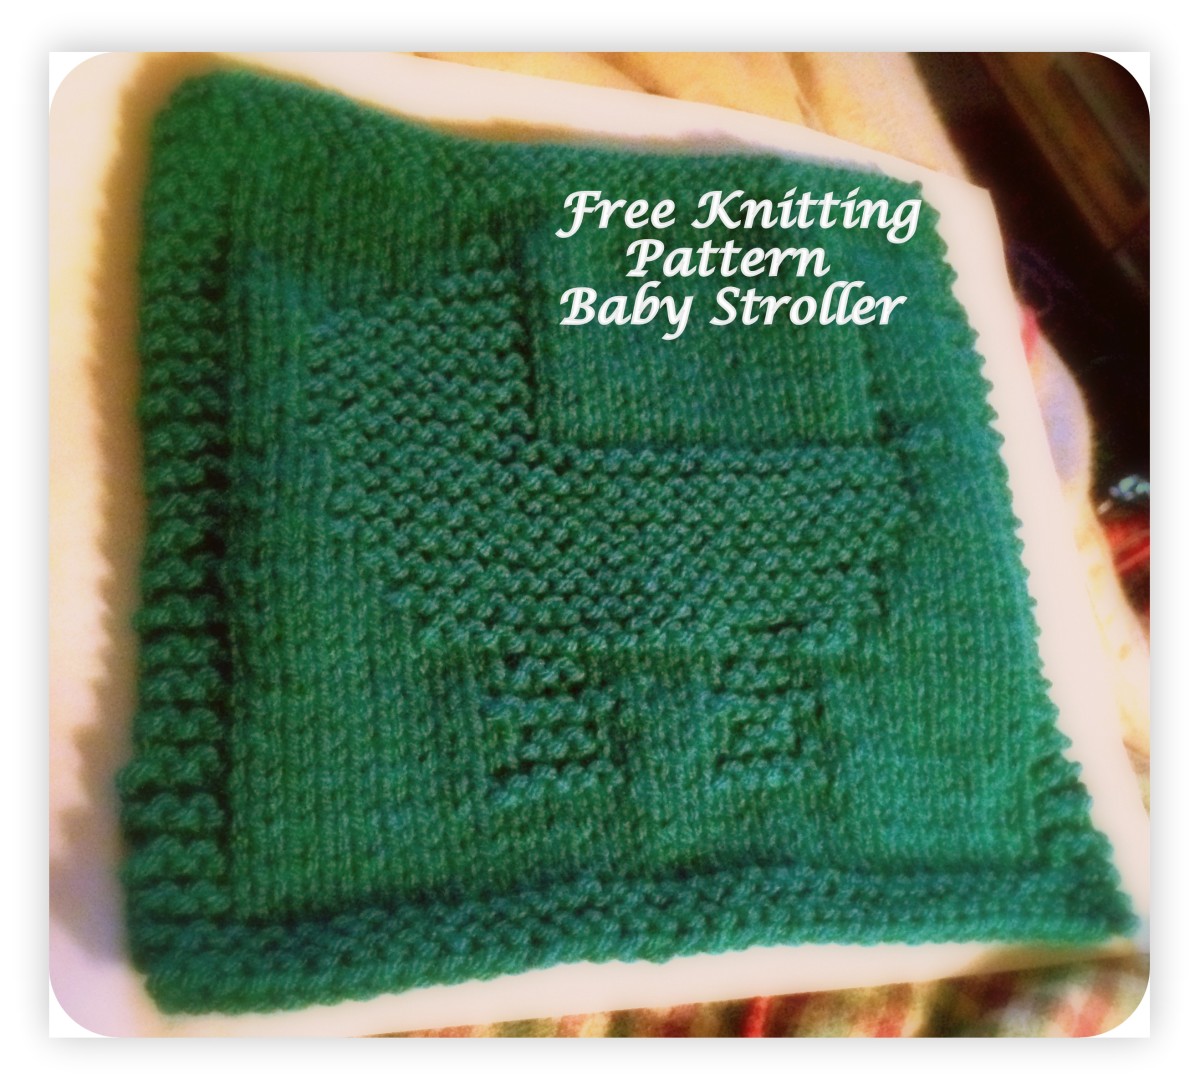 How to Knit a Dishcloth: Free Knitting Pattern - Baby Stroller Pt1